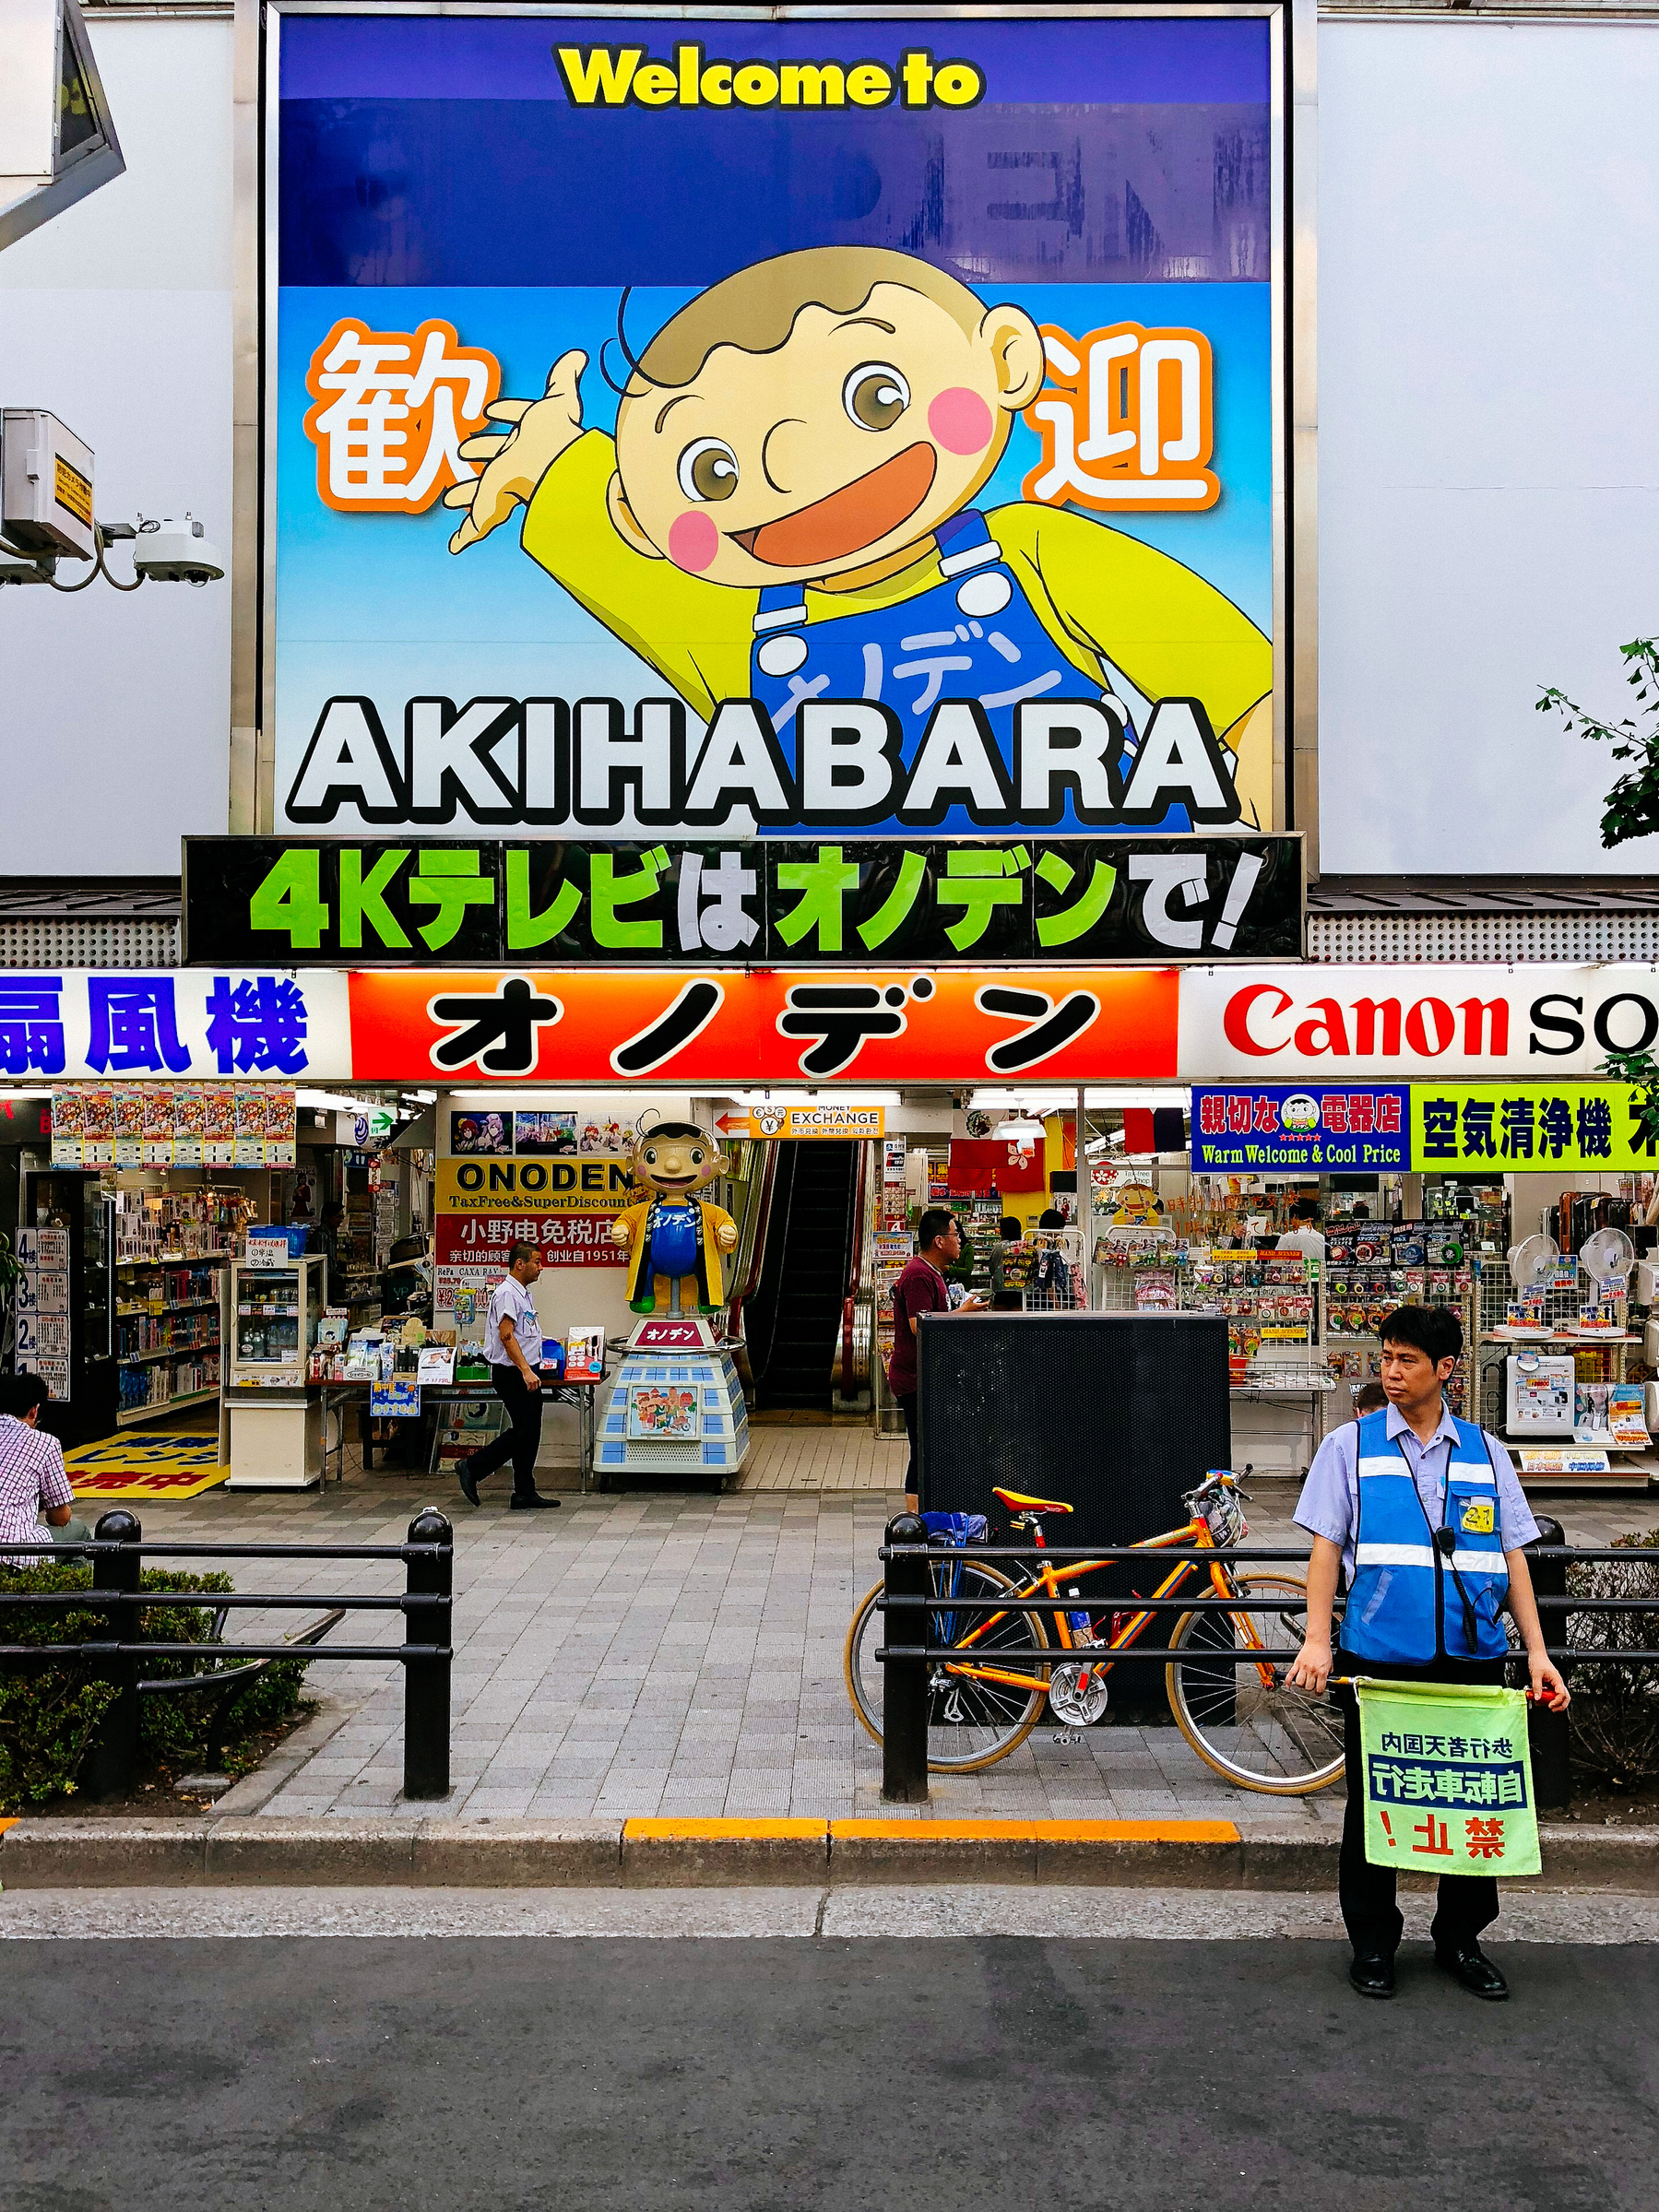 a sign saying “welcome to Akihabara” lights up the street